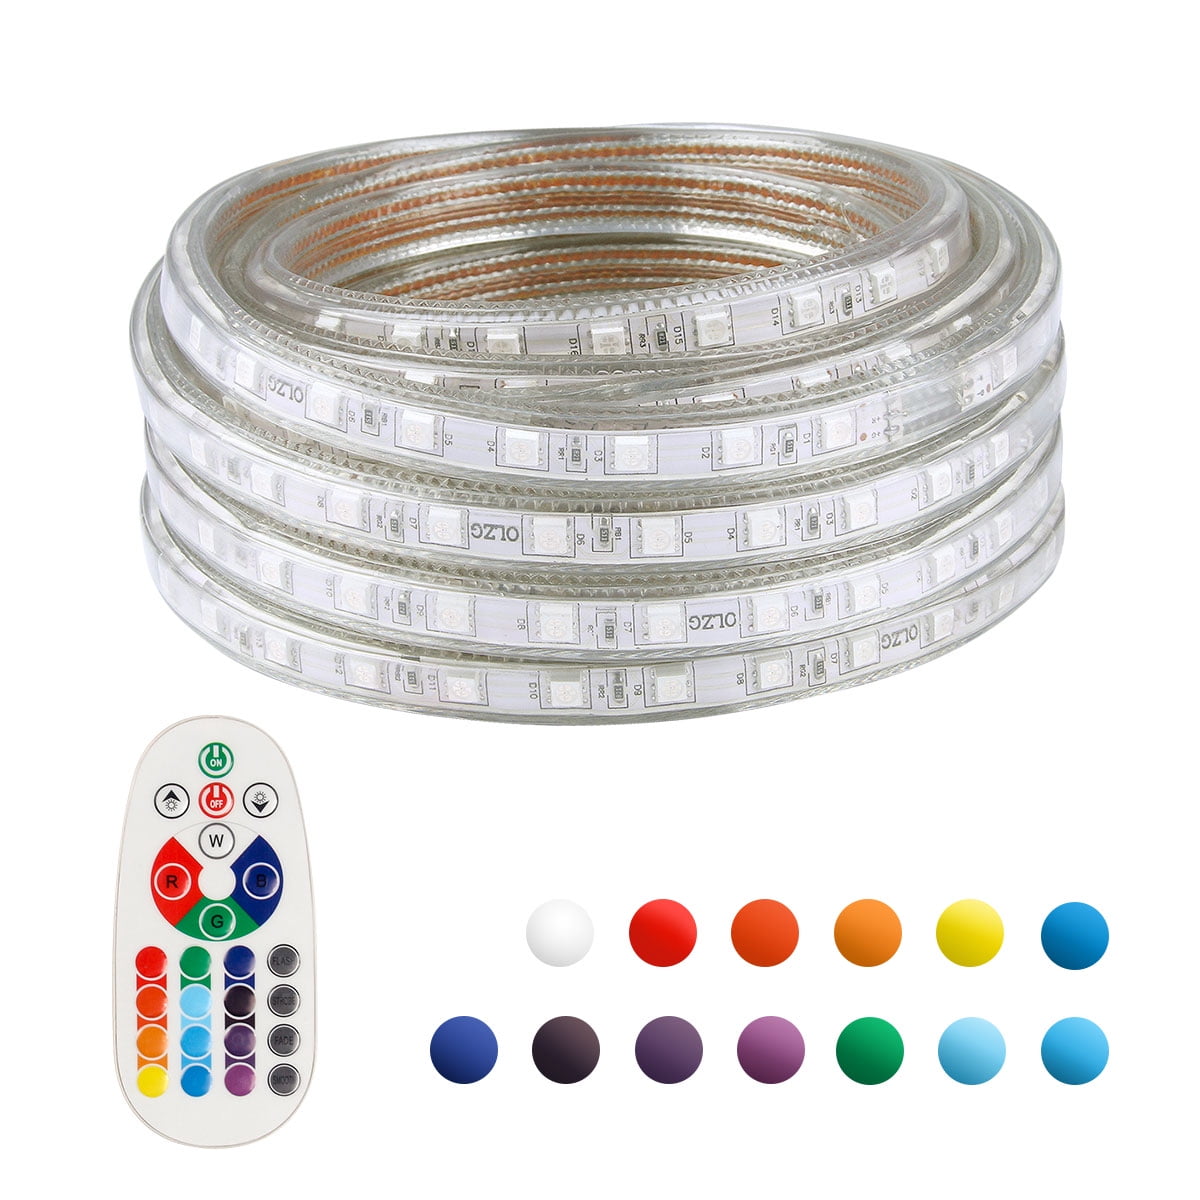 【Sale】5M-10M Multicolor LED Light Strip Color Changing RGB Colour for  Decoration Home Party Lights with Remote Control